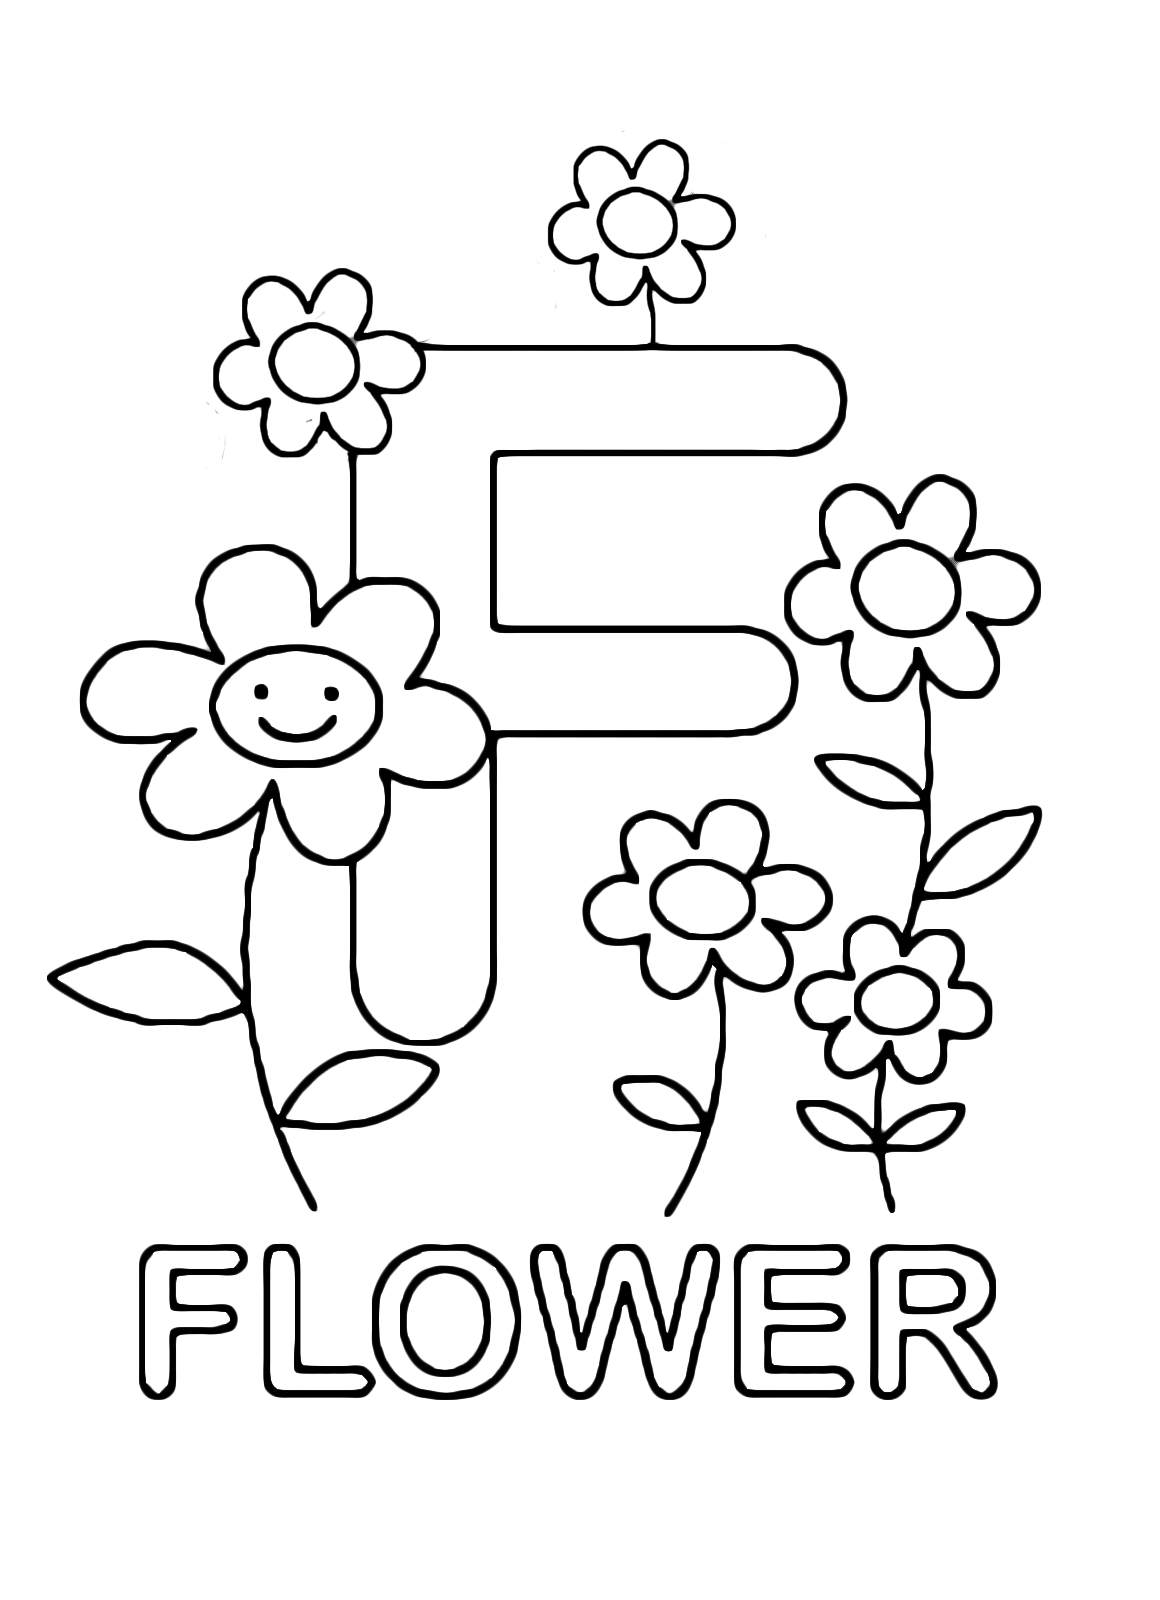 Letters and numbers - F for flower uppercase letter